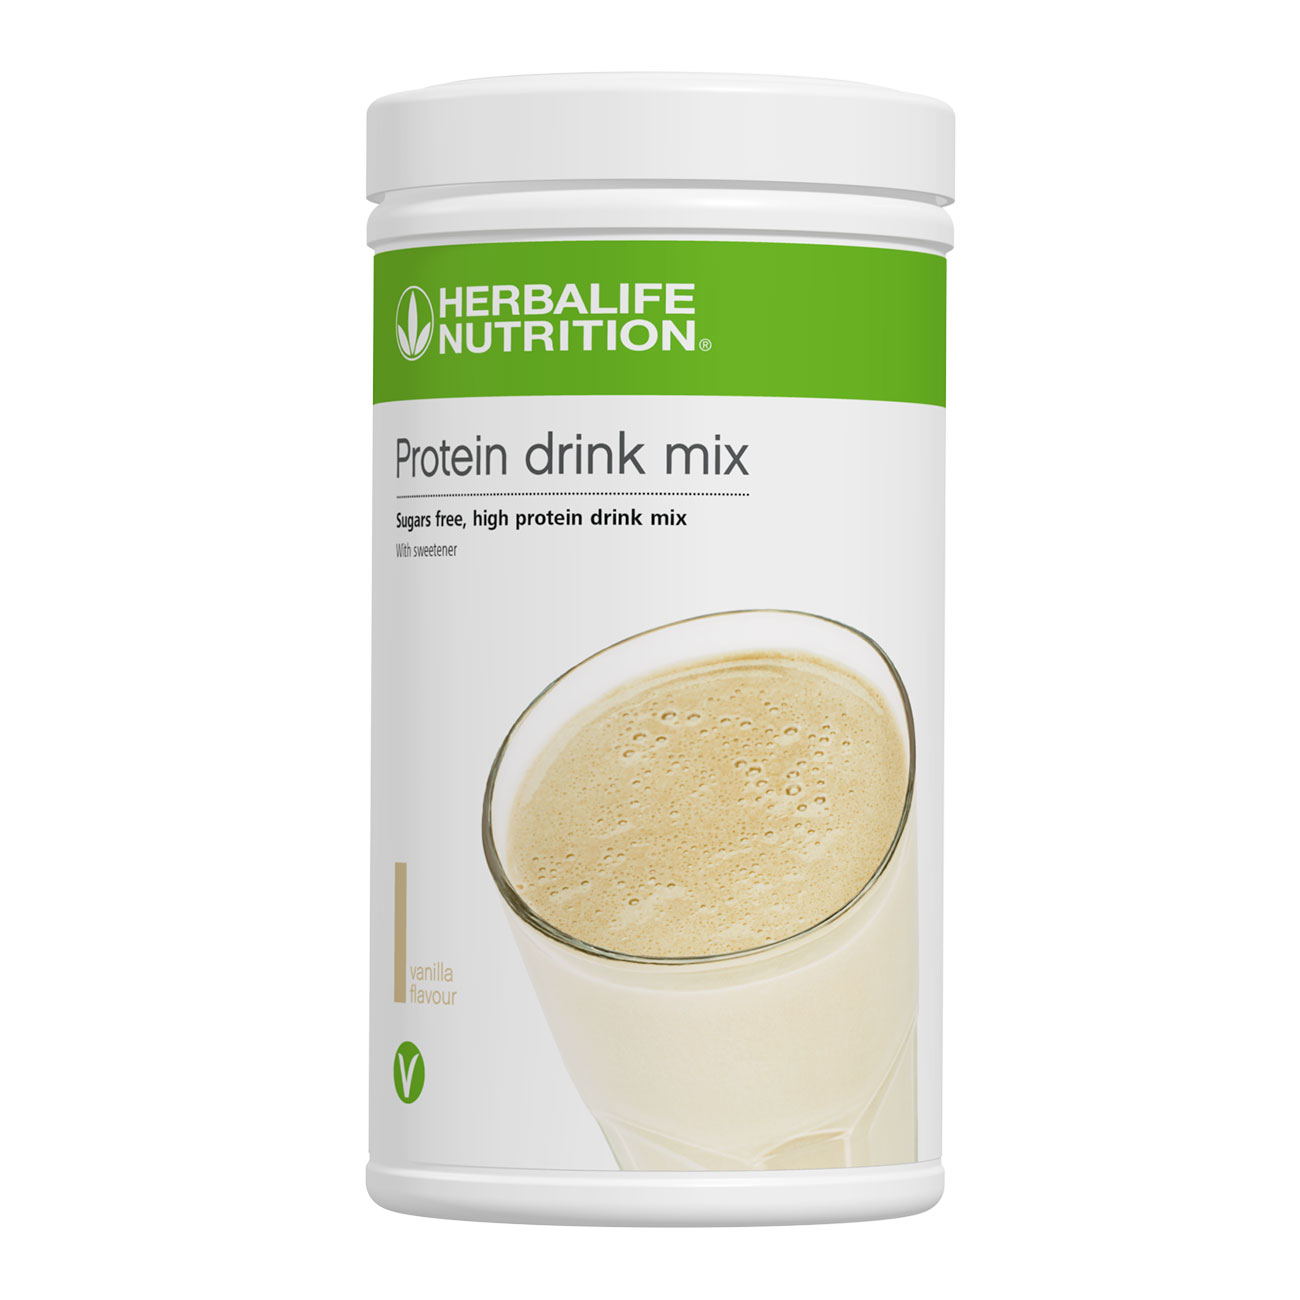 Protein Drink Mix product shot